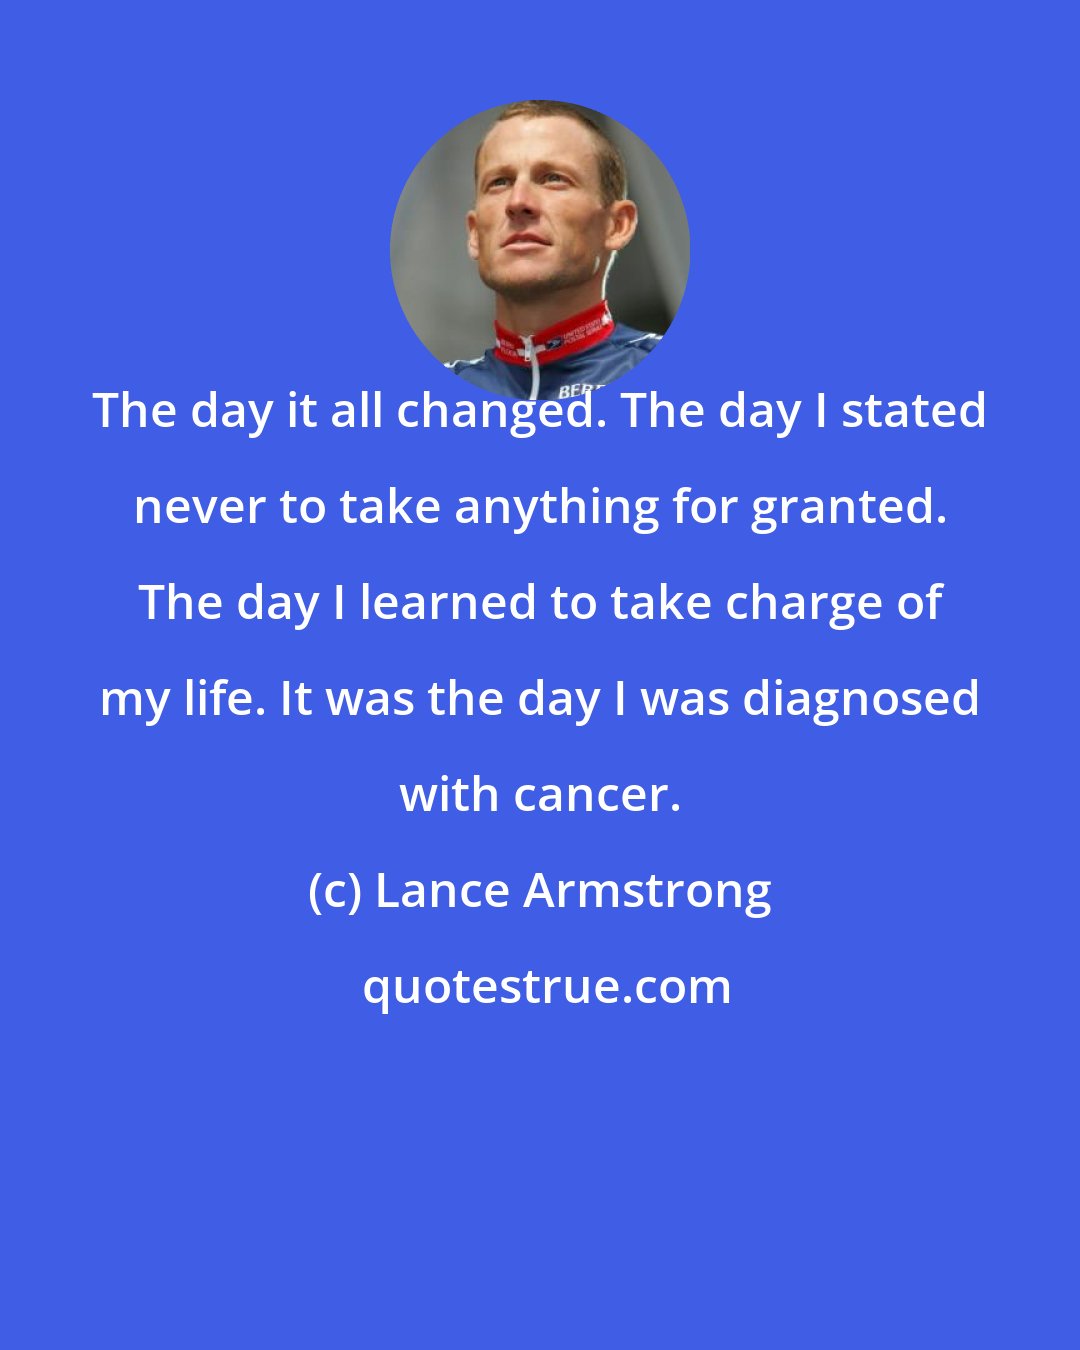 Lance Armstrong: The day it all changed. The day I stated never to take anything for granted. The day I learned to take charge of my life. It was the day I was diagnosed with cancer.